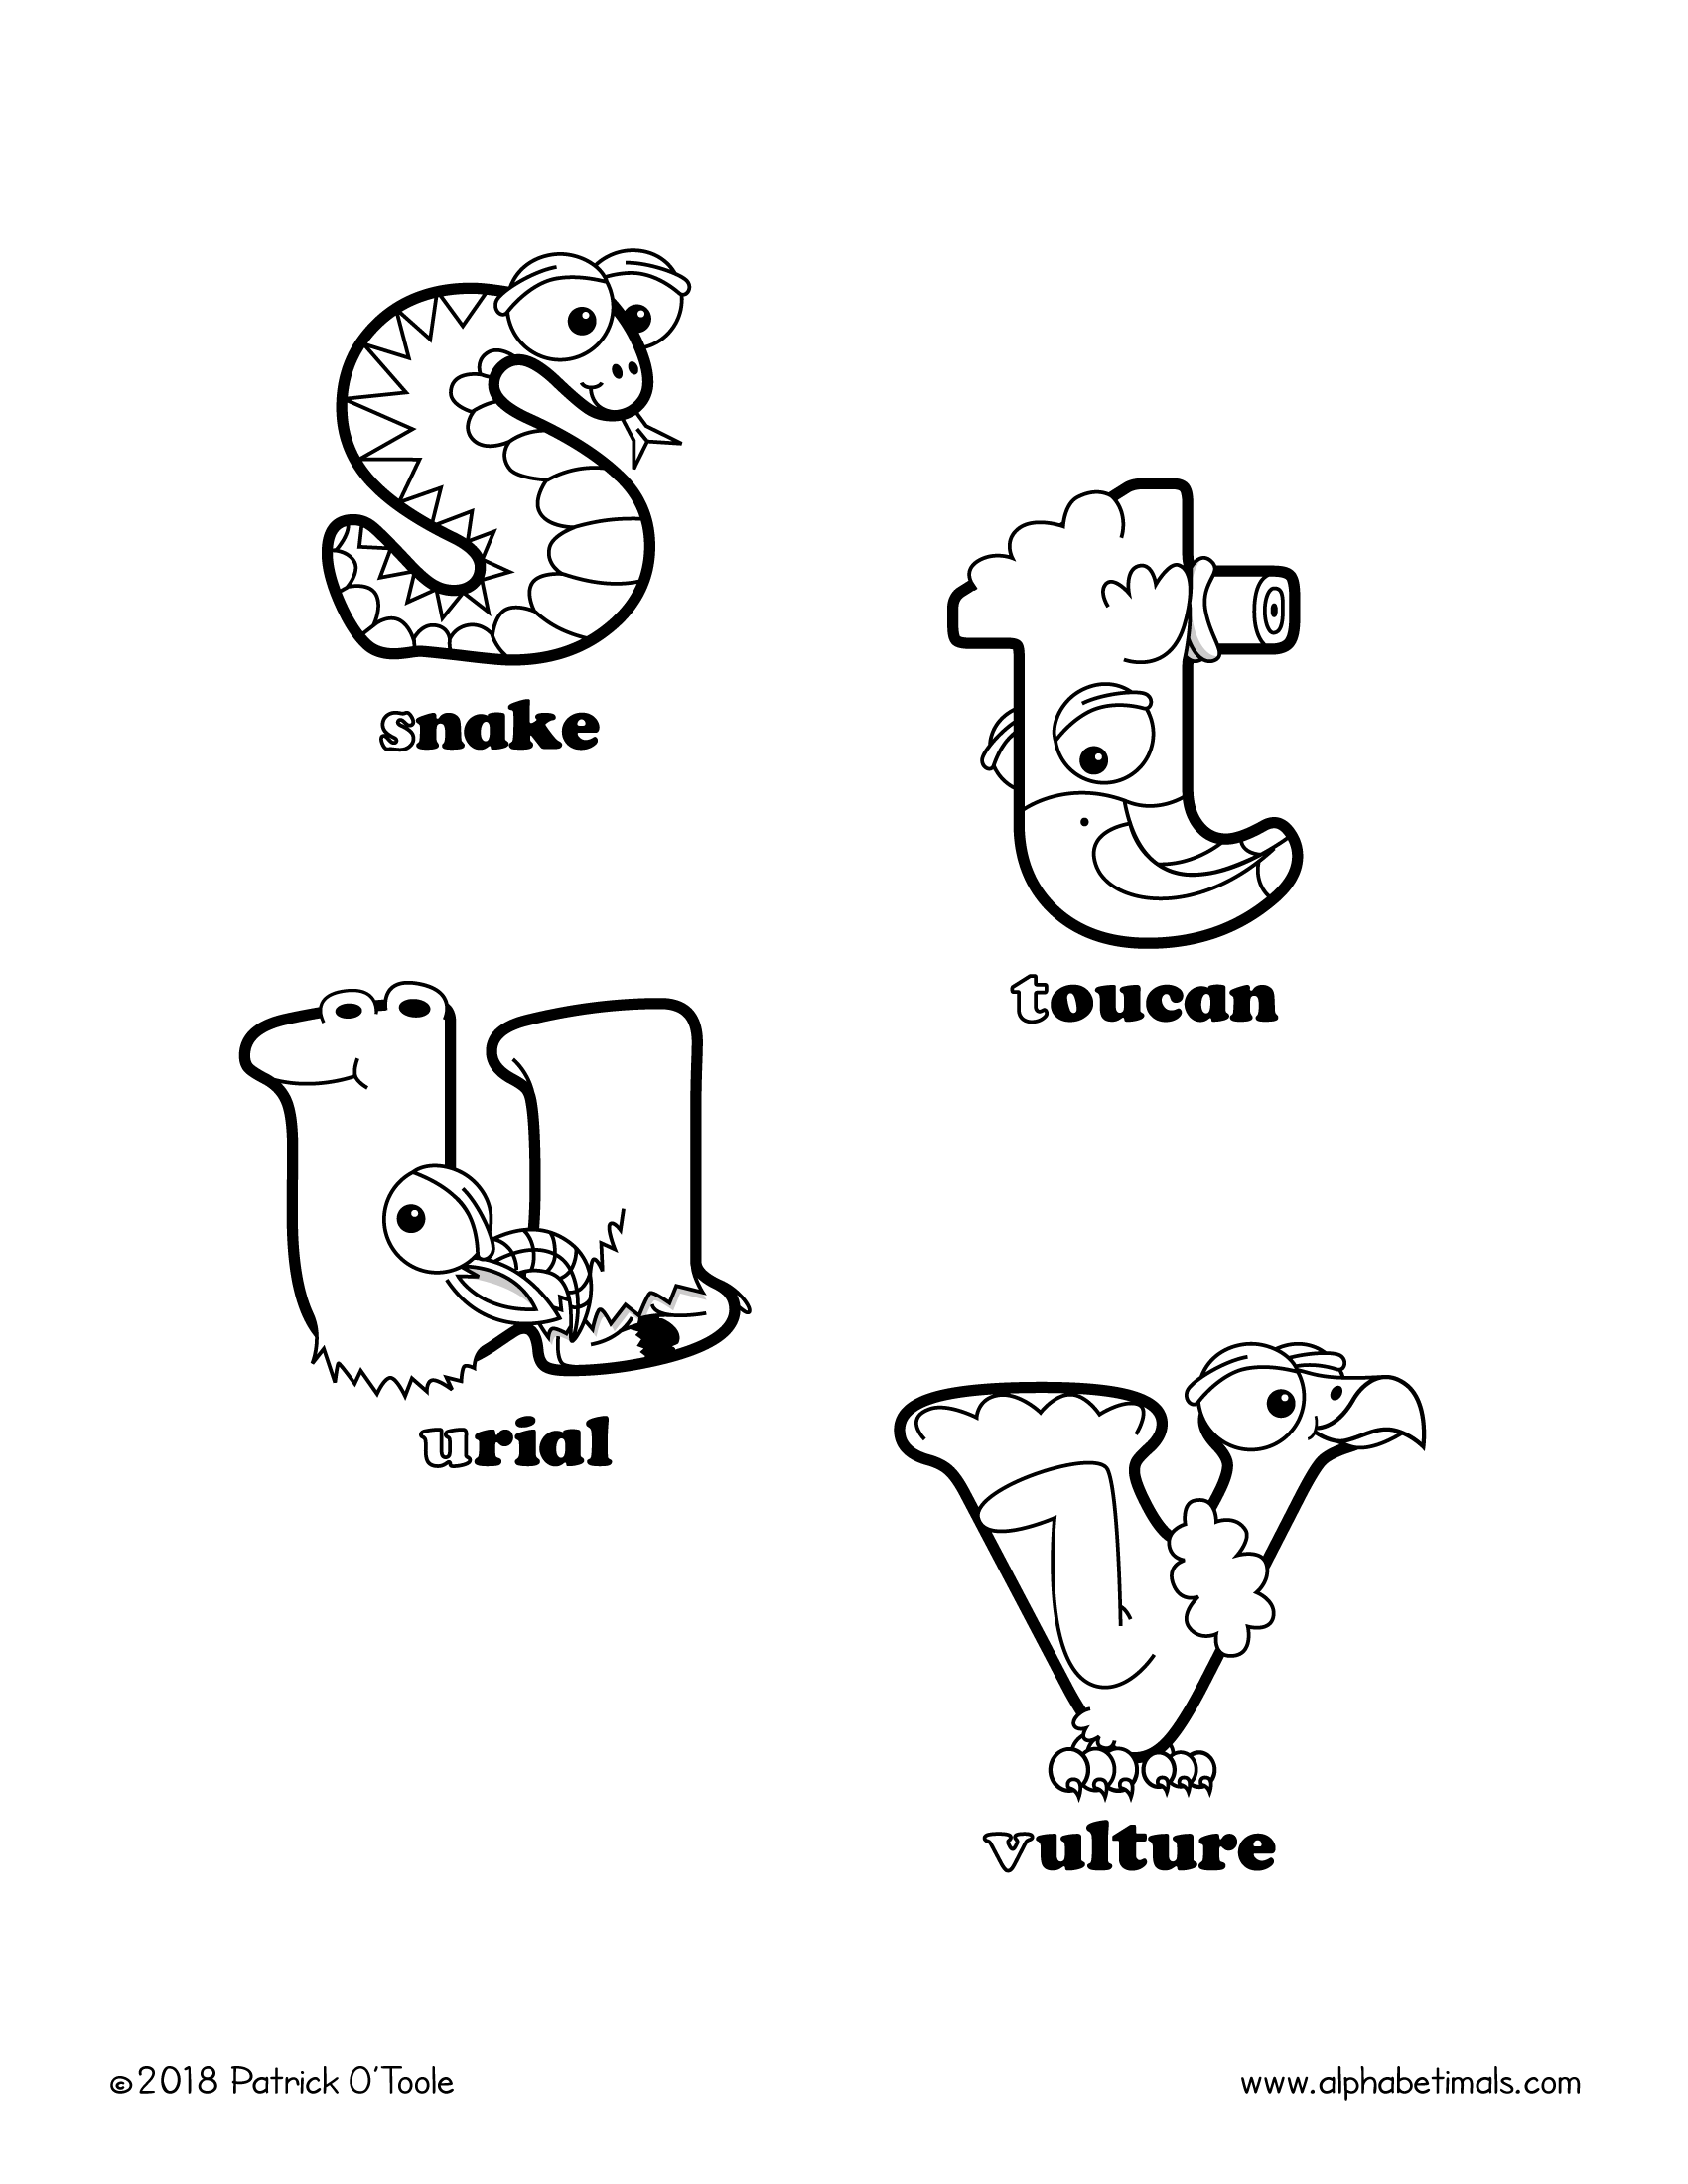 Alphabet Lore U, V, W, X, Y, Z coloring page - Download, Print or Color  Online for Free